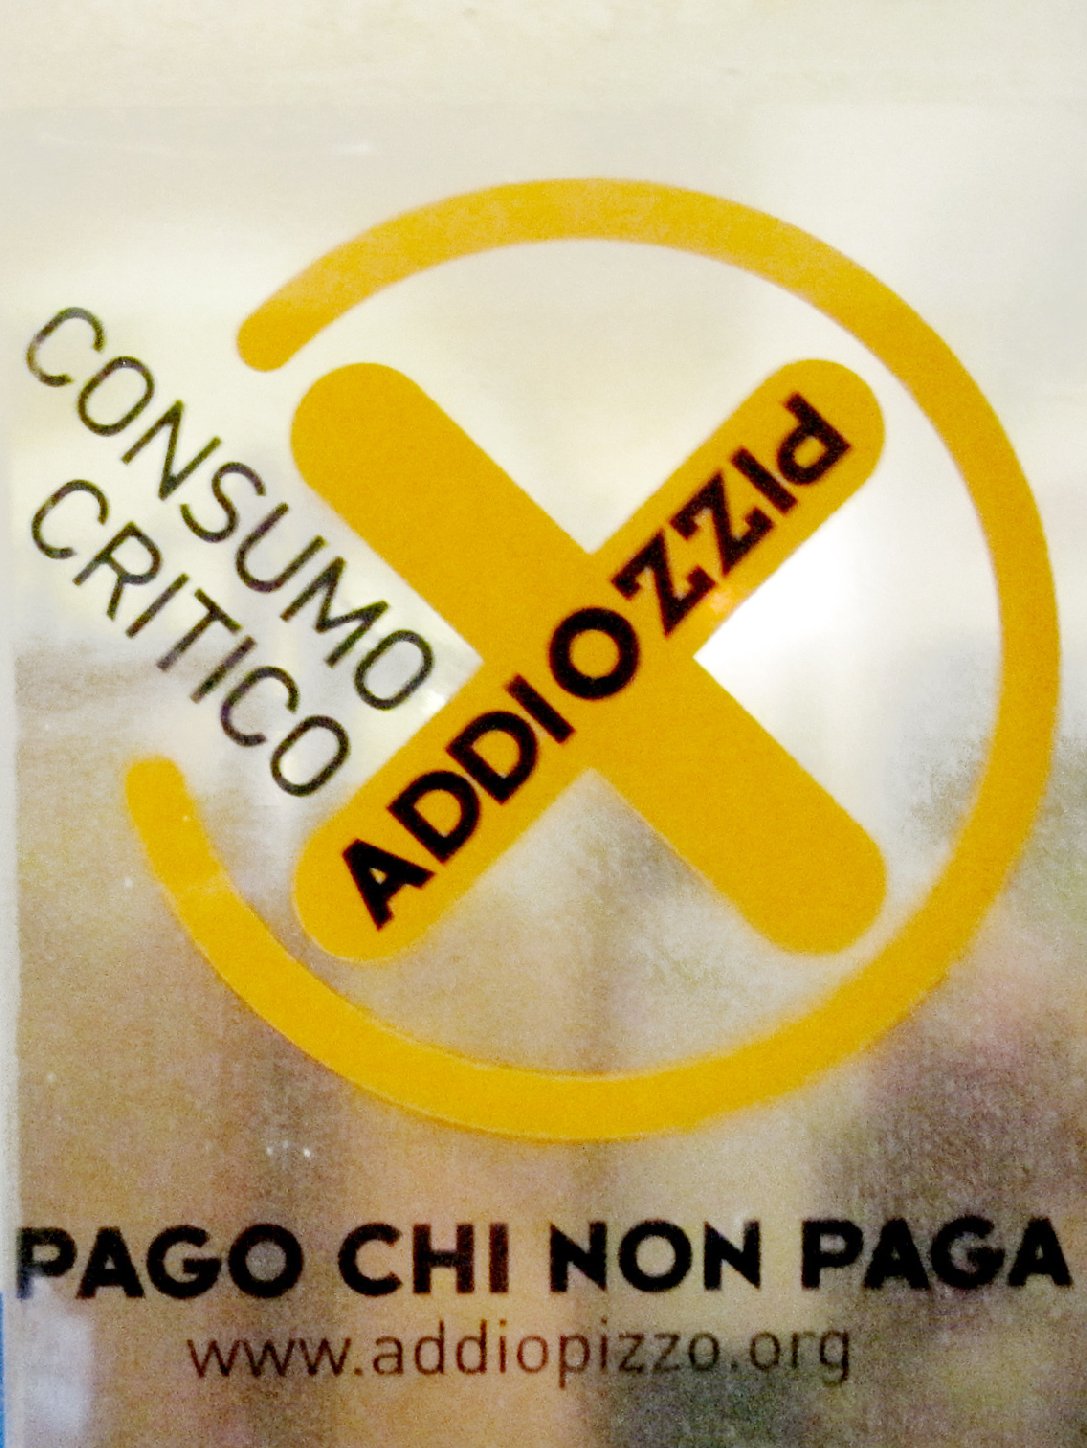 The Addiopizzo sticker on the door of a restaurant or hotel in Sicily tells you the establishment does not pay extortion money to the Mafia. Photo: The Kitchen Sisters